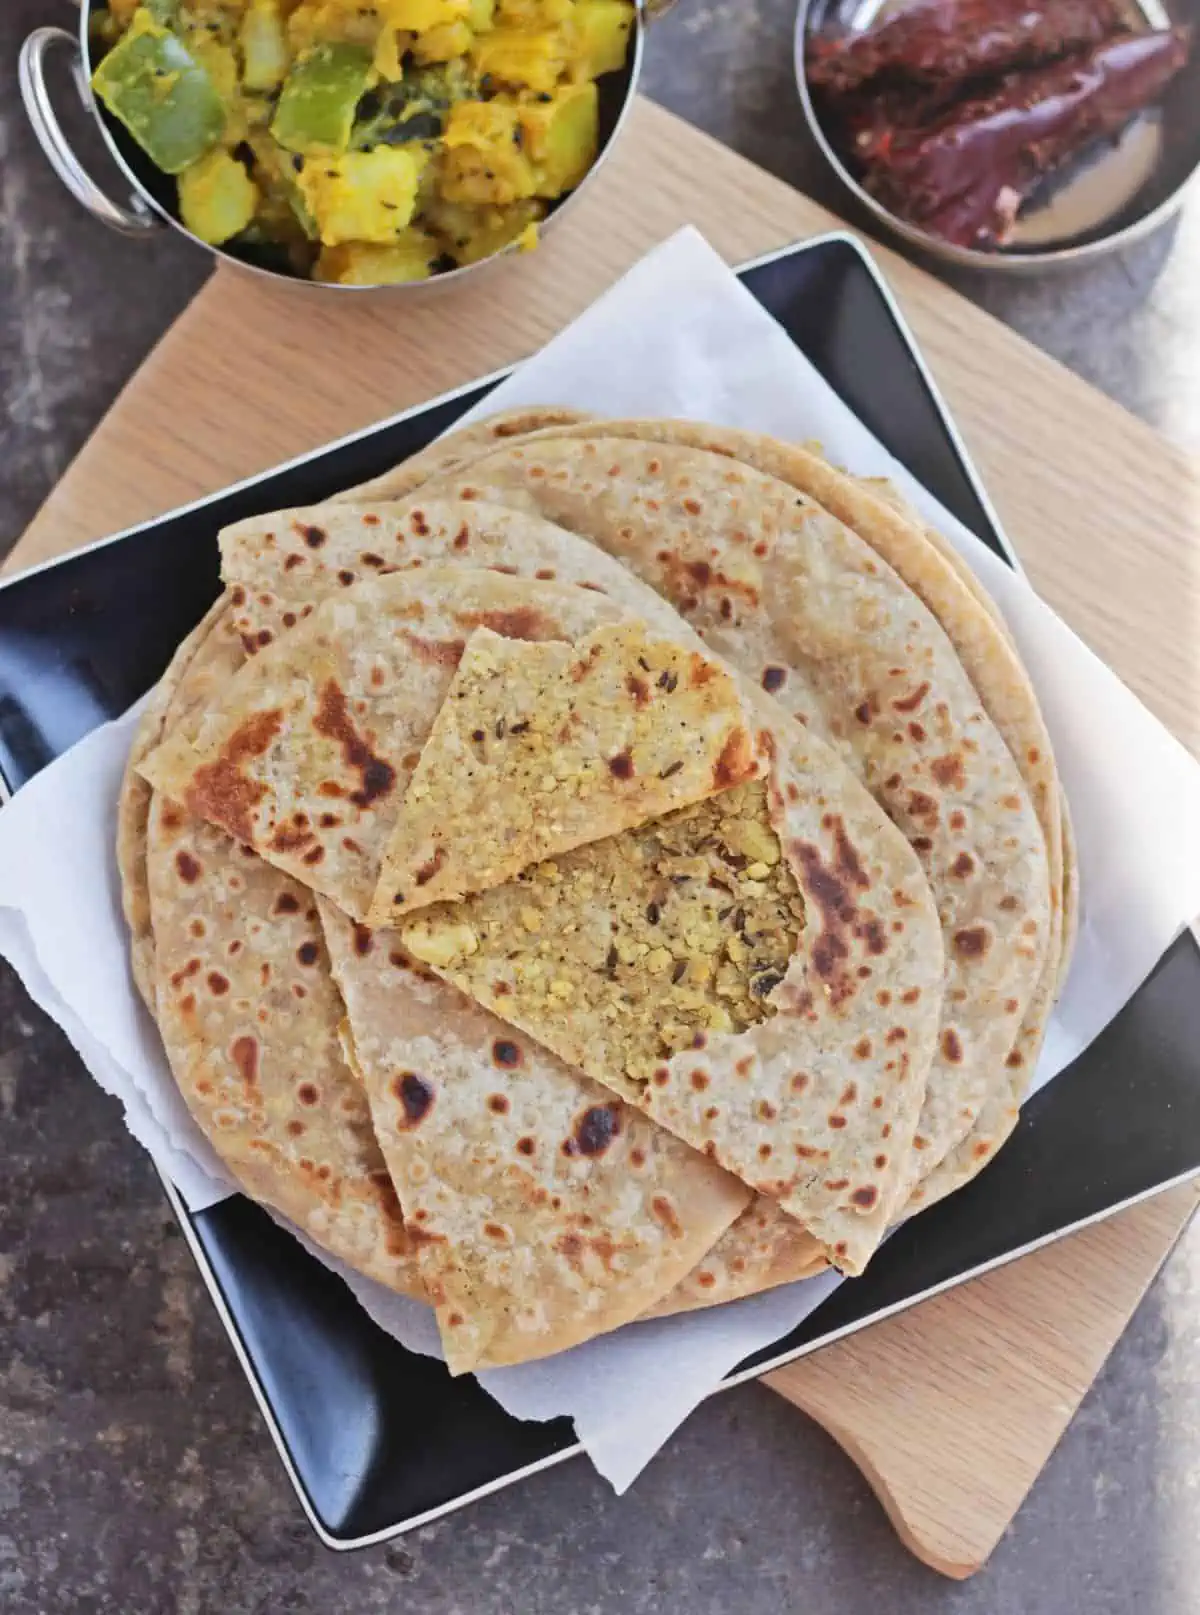 Layers of paratha with the top one showing a stuffed lentil filling.